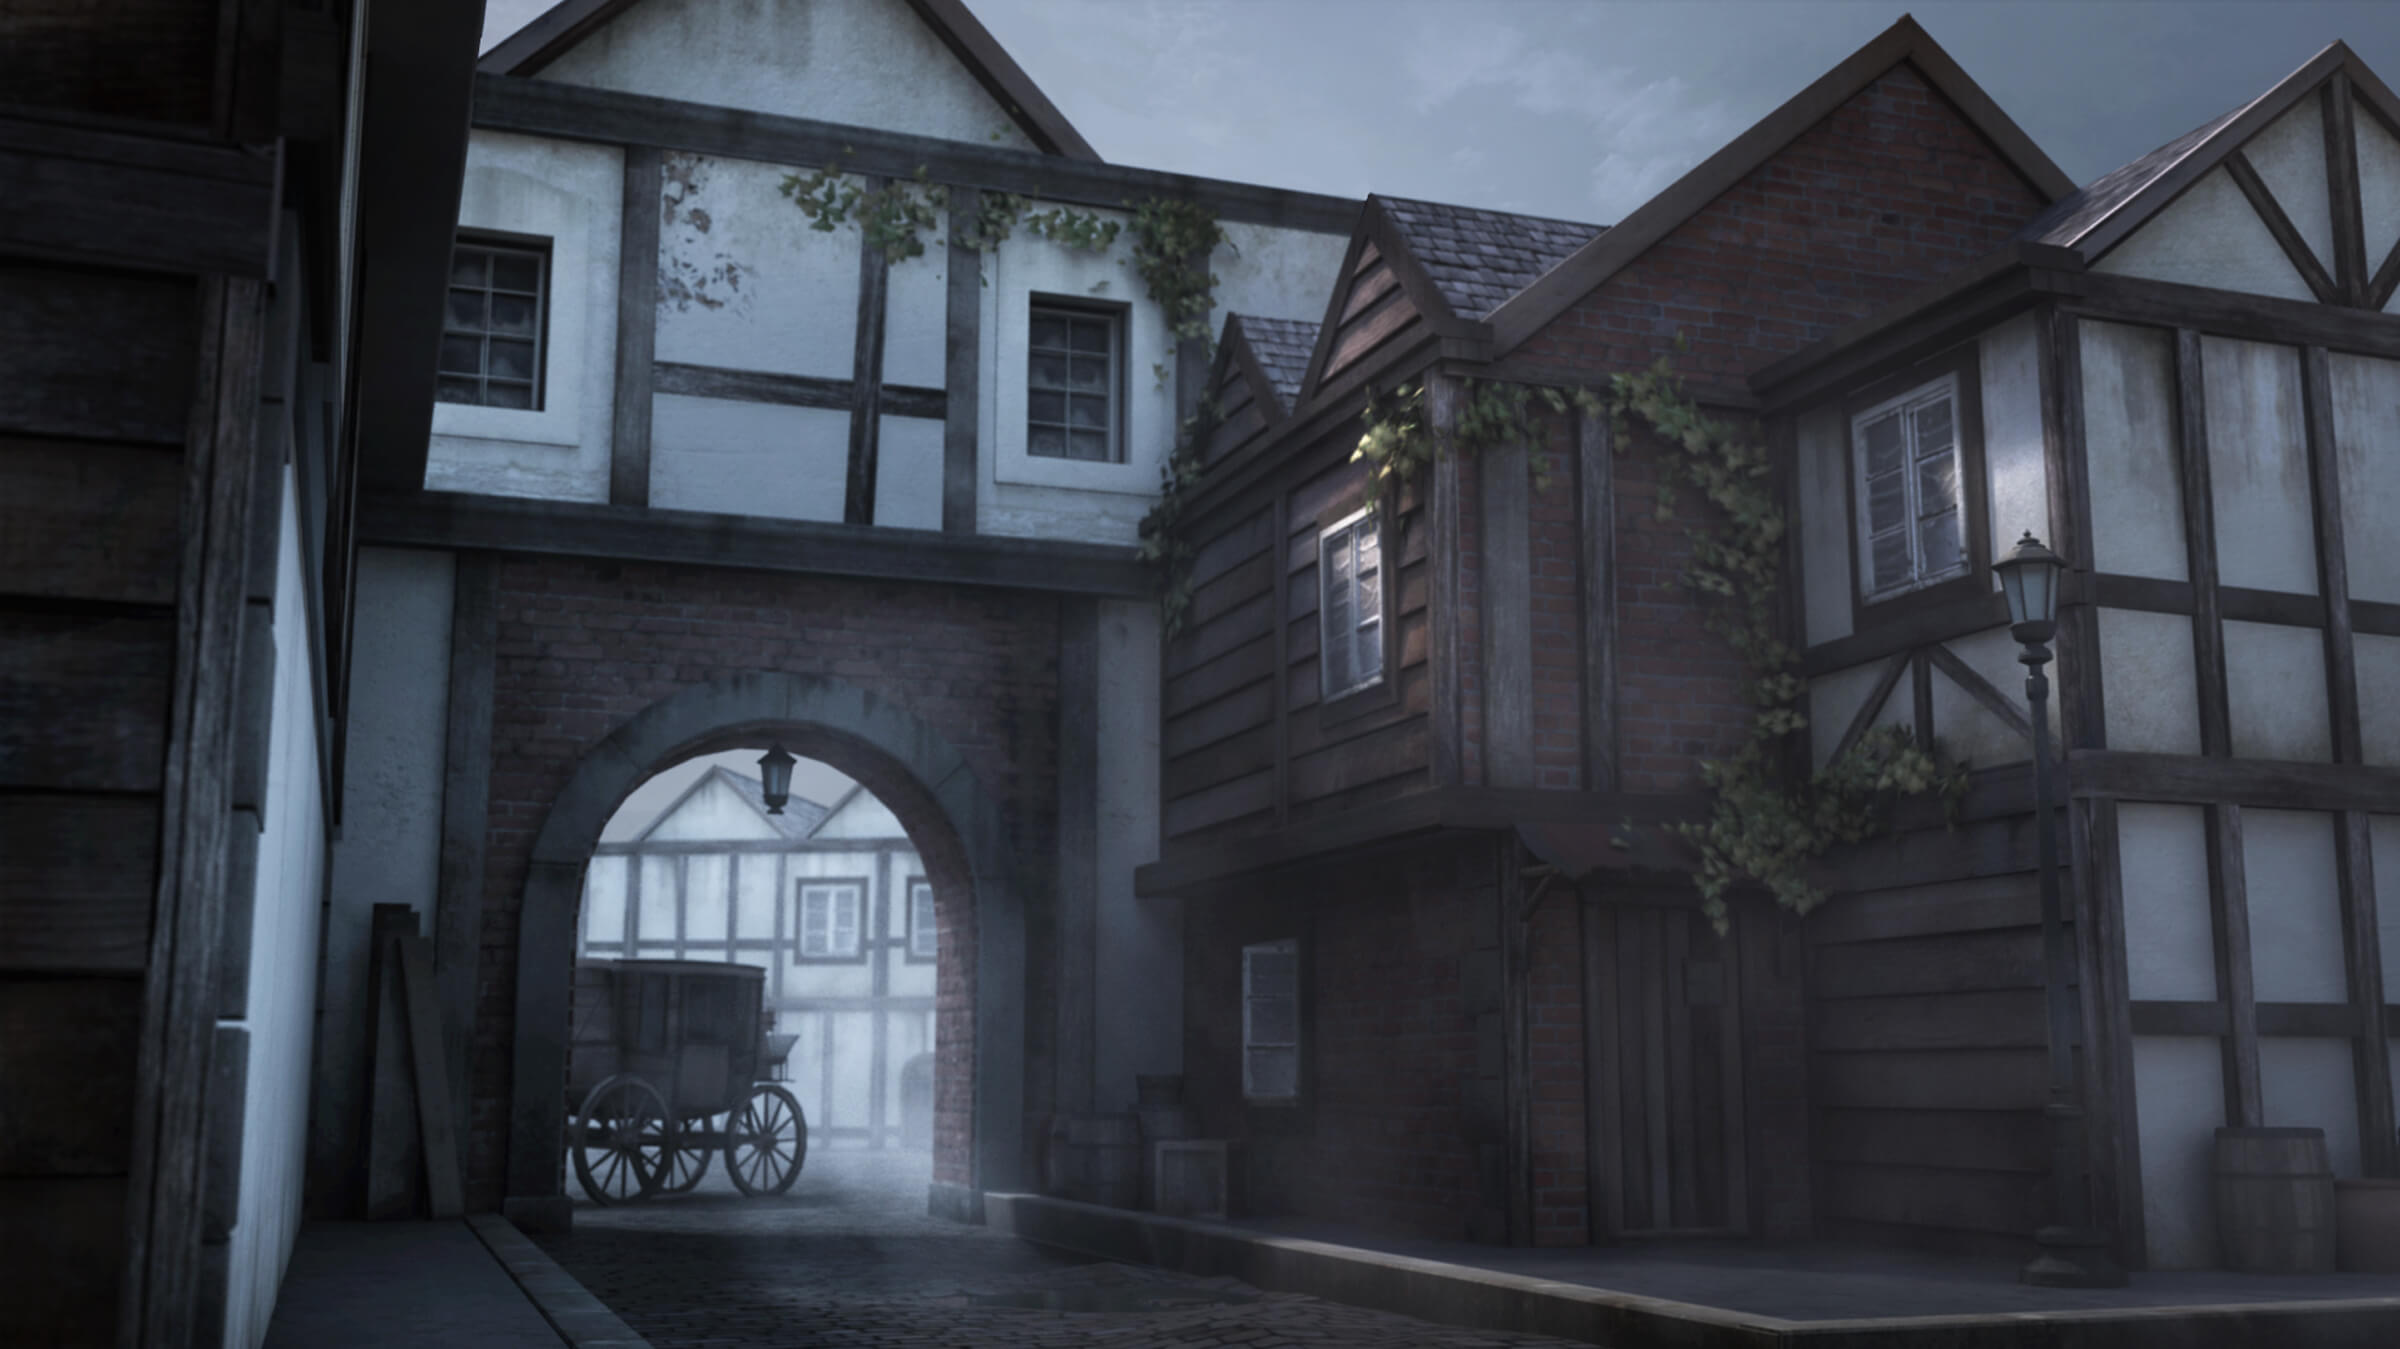 computer-generated 3D environment with darkened tudor-style buildings and a carriage